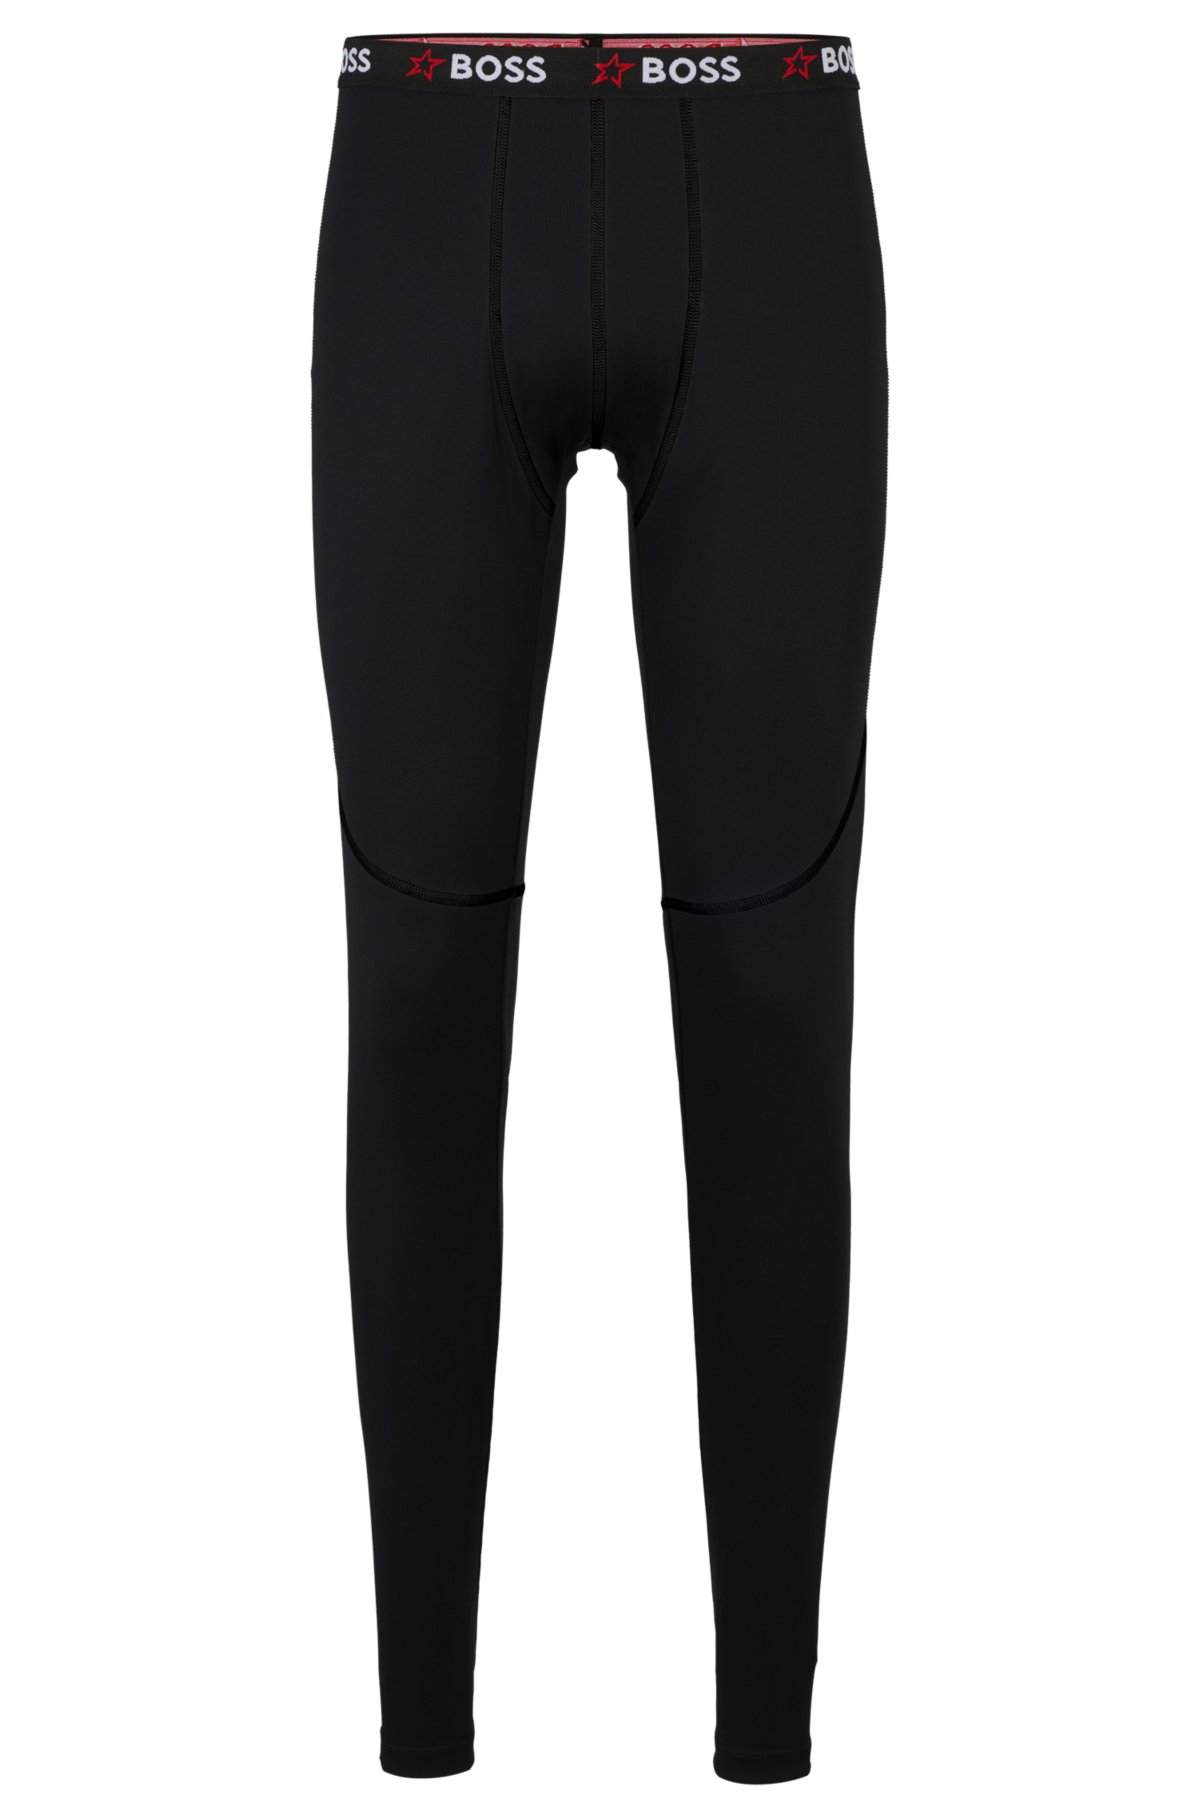 BOSS - BOSS x Perfect Moment thermal ski leggings with branded waistband